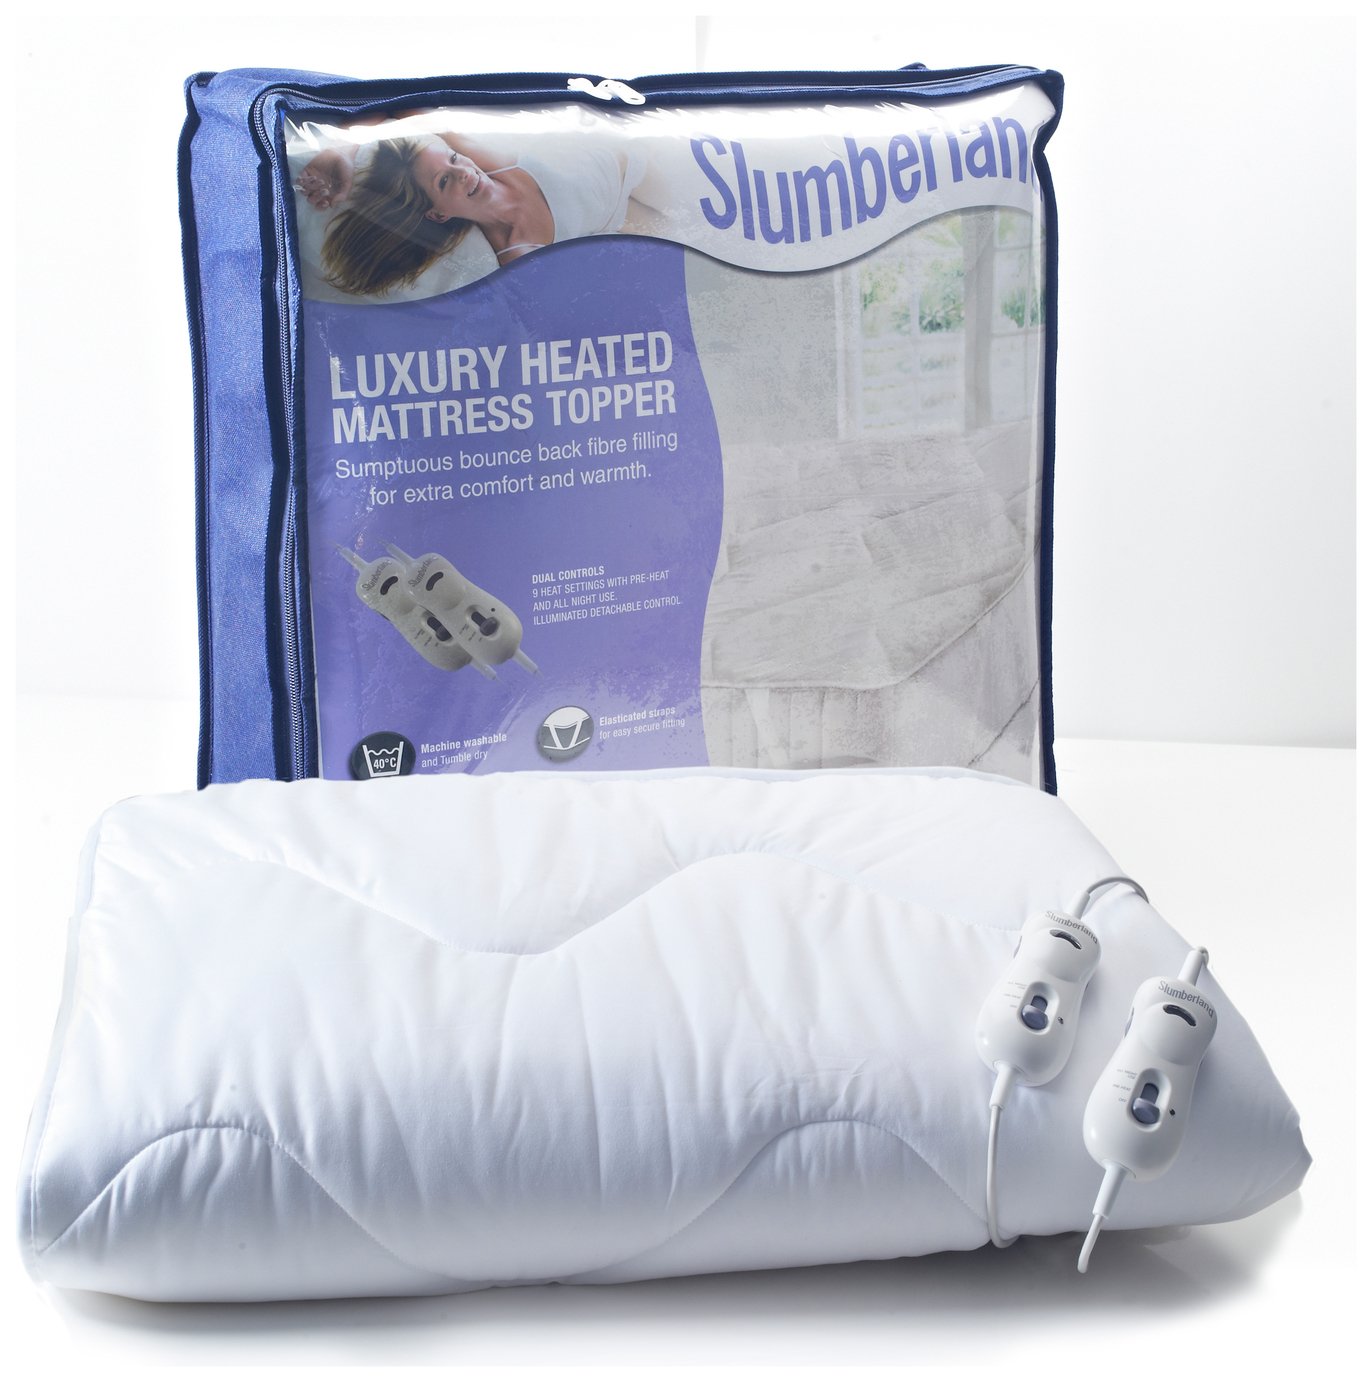 Slumberland Mattress Topper with Dual Control - Double